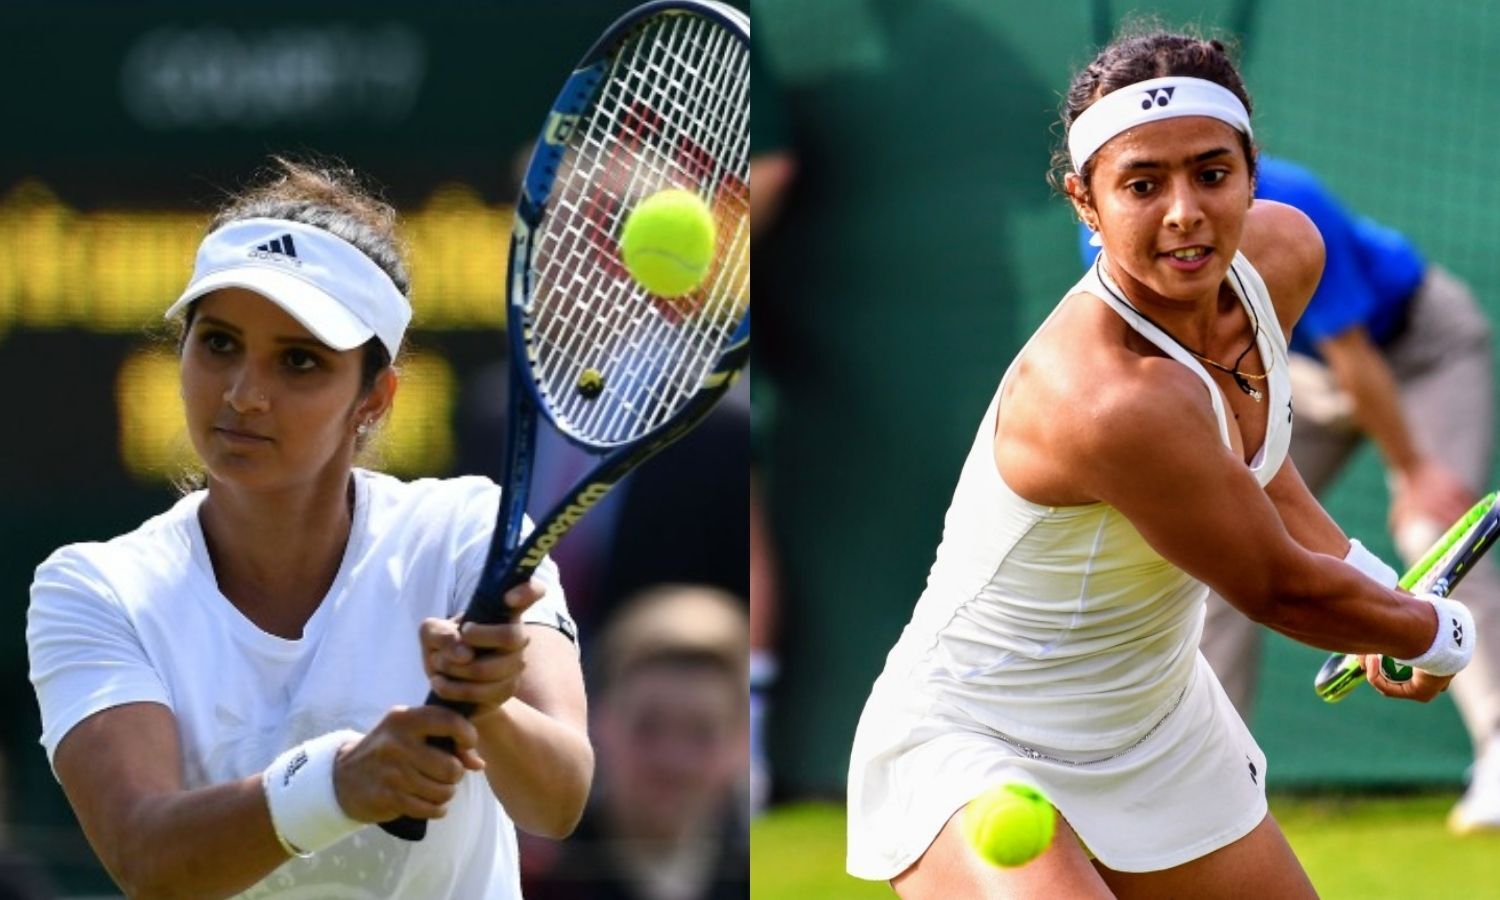 Wimbledon Sania Mirza to face-off Ankita Raina before Olympics — Preview, when and where to watch, LIVE streaming